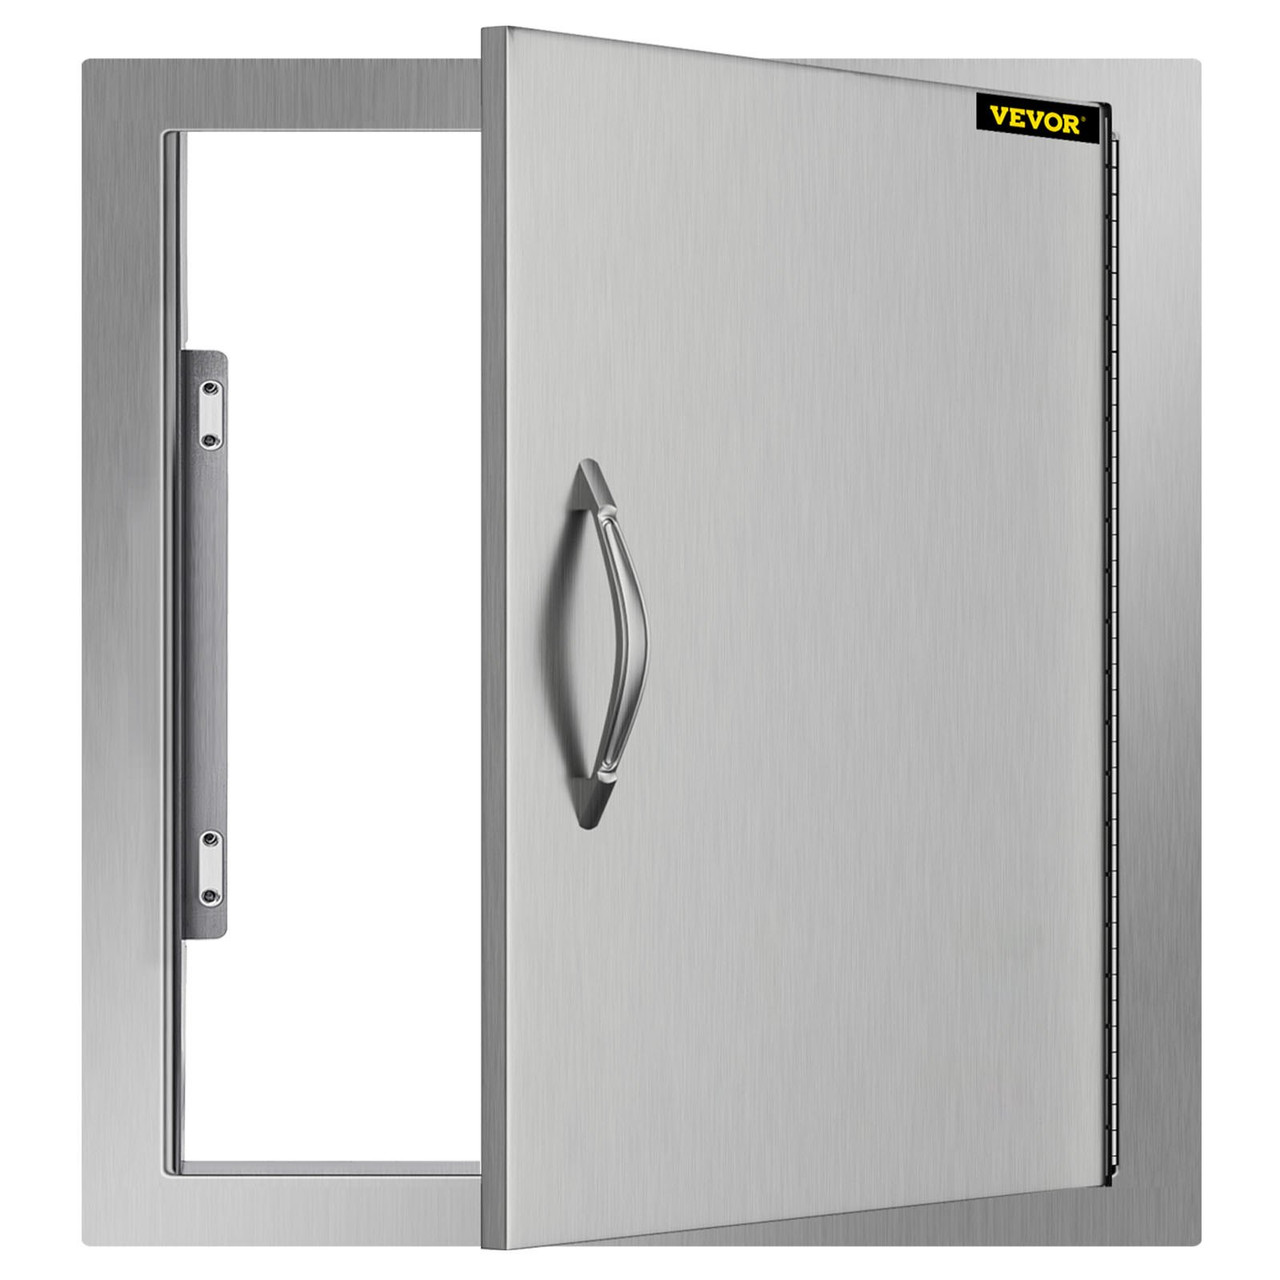 BBQ Access Door 18W x 20H Inch, Vertical Single BBQ Door Stainless Steel, Outdoor Kitchen Doors for BBQ Island, Grill Station, Outside Cabinet